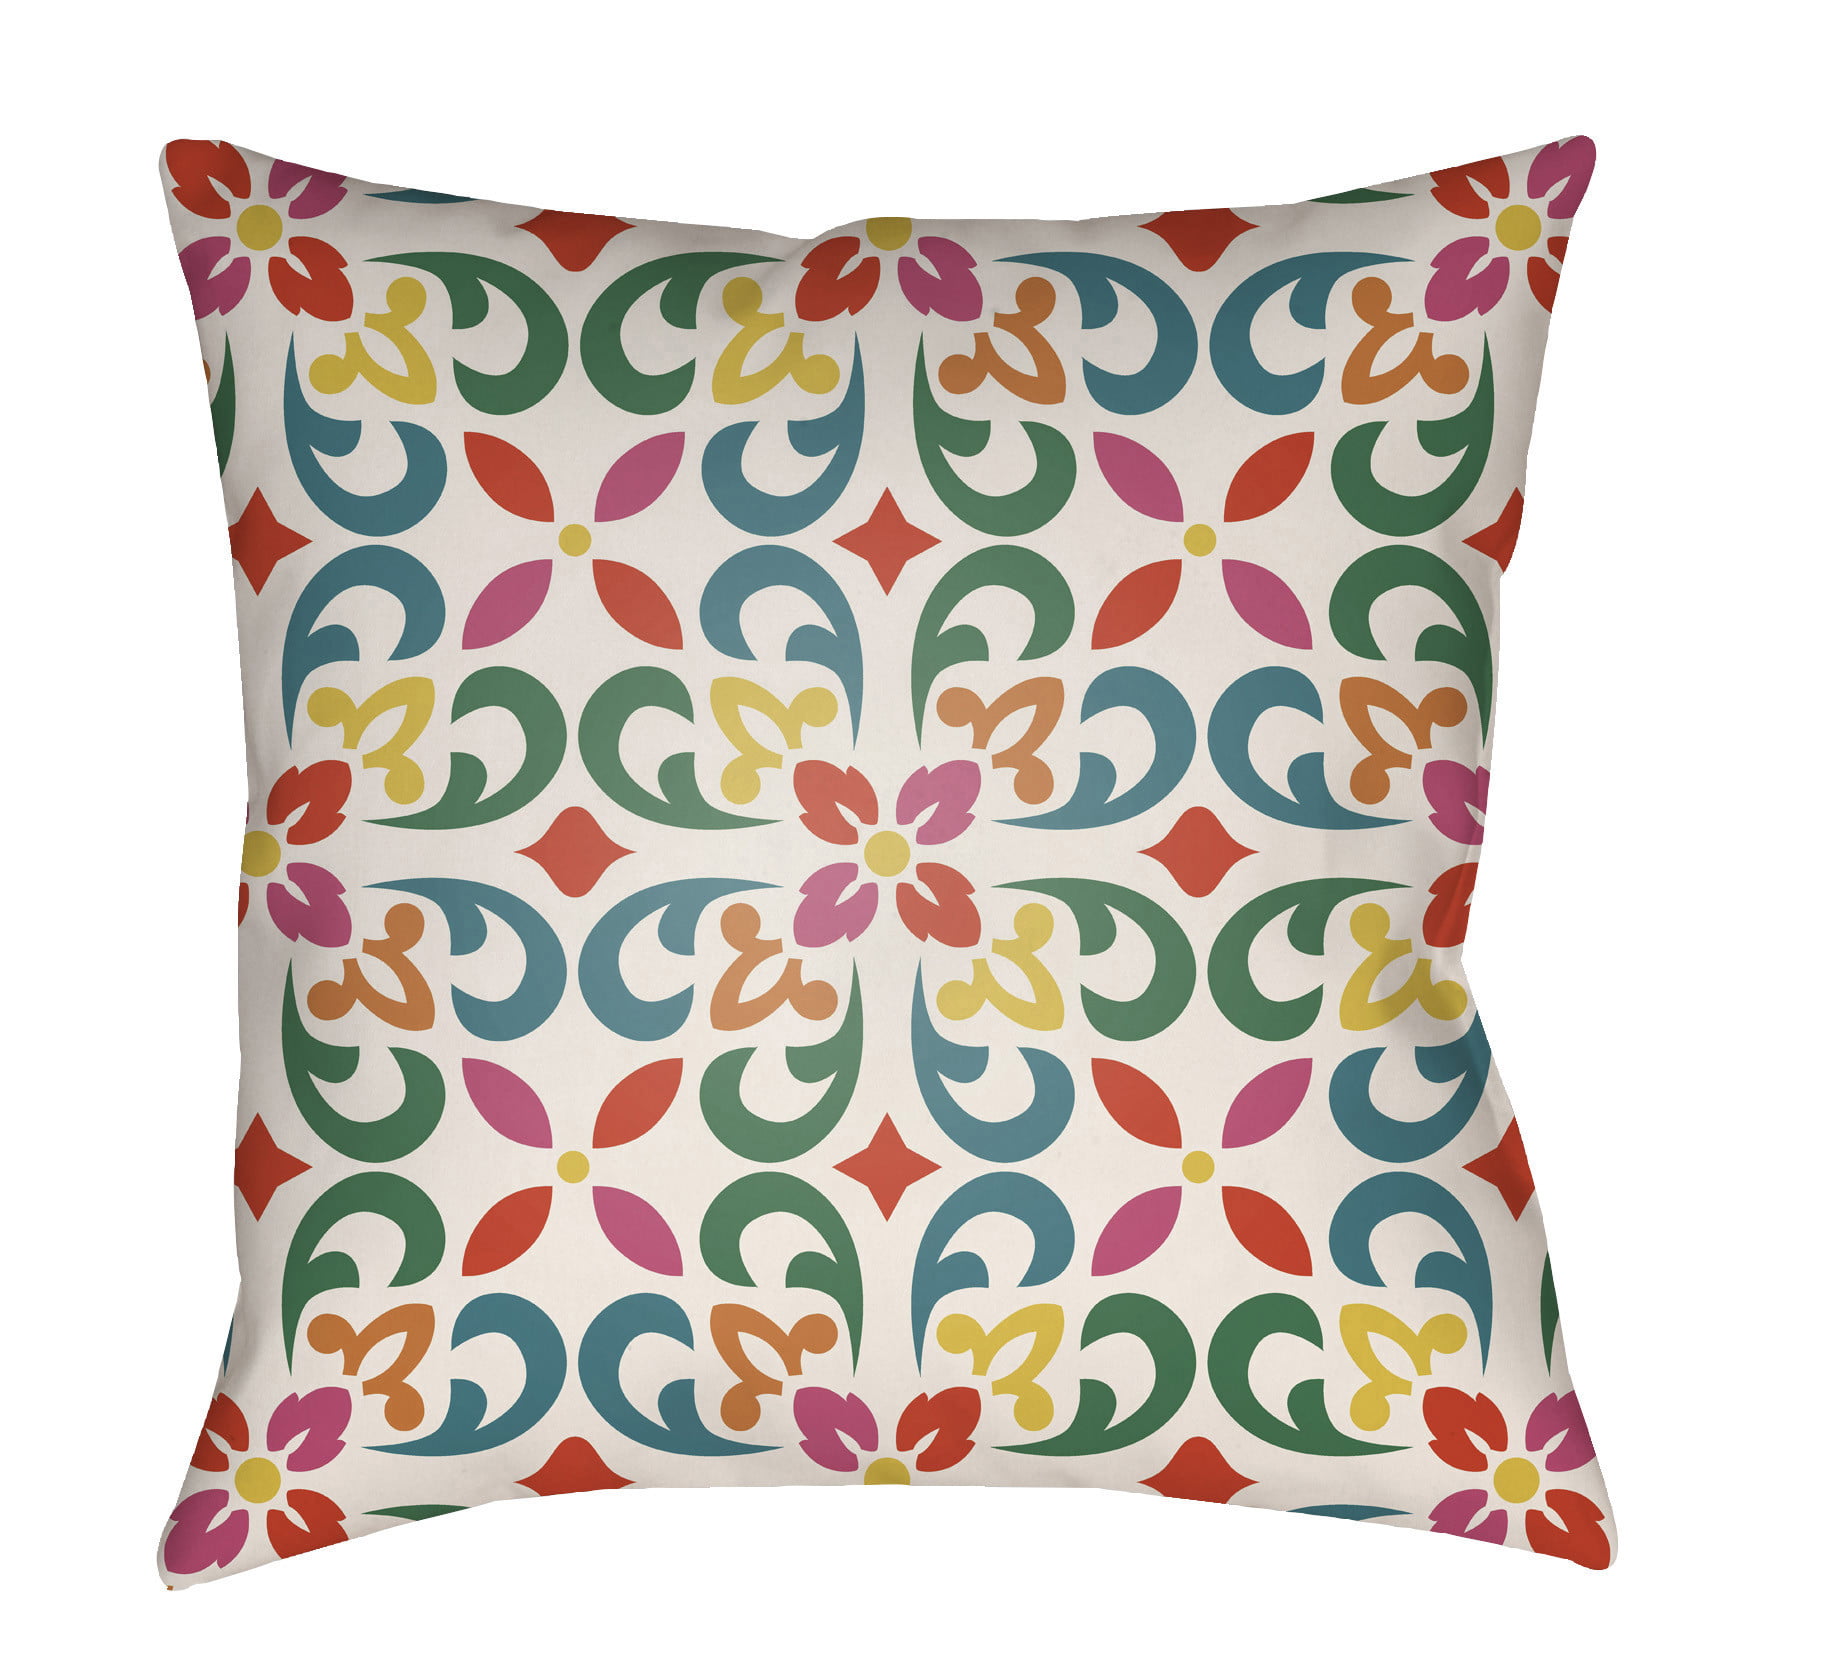 Picture of Artistic Weavers LOTA1309-2020 Lolita Square Pillow, Poppy Red & Teal - 20 x 20 in.